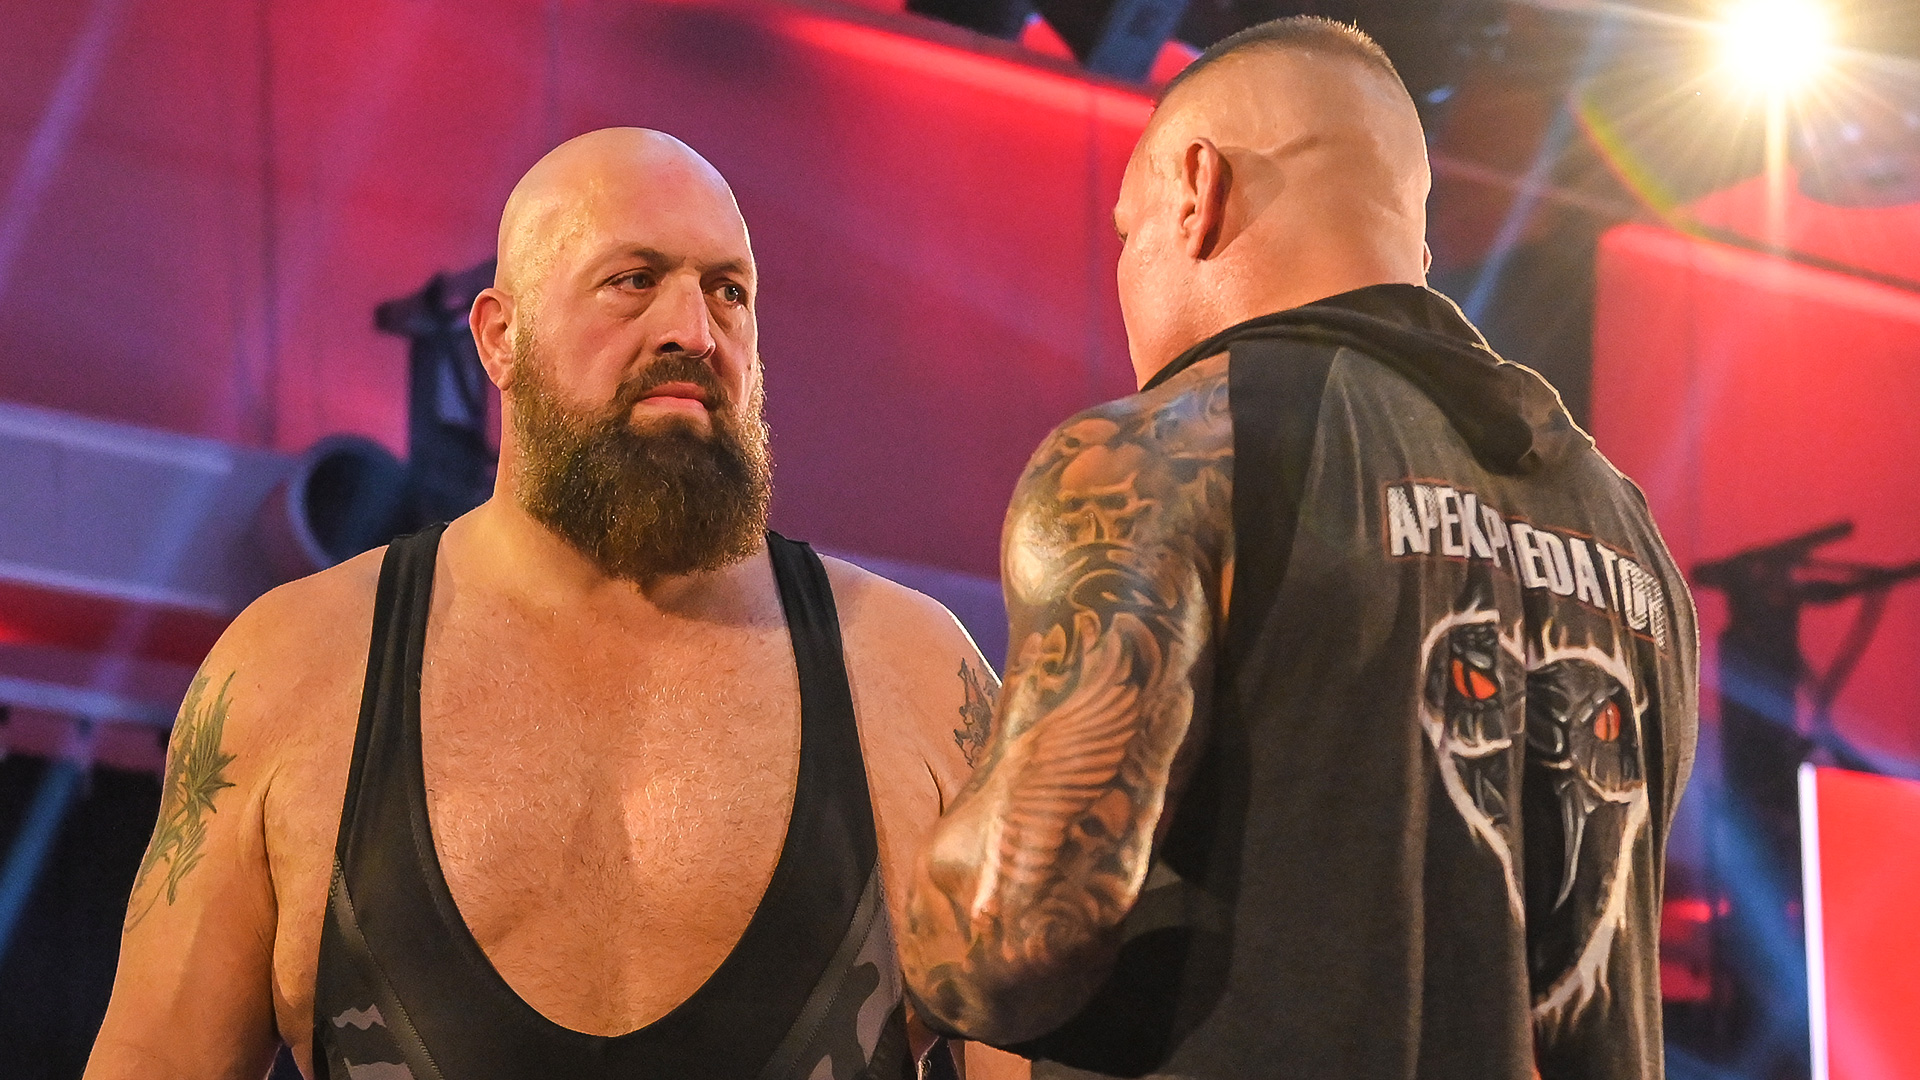 WWE Raw preview: Big Show on his match vs. Randy Orton - Sports Illustrated